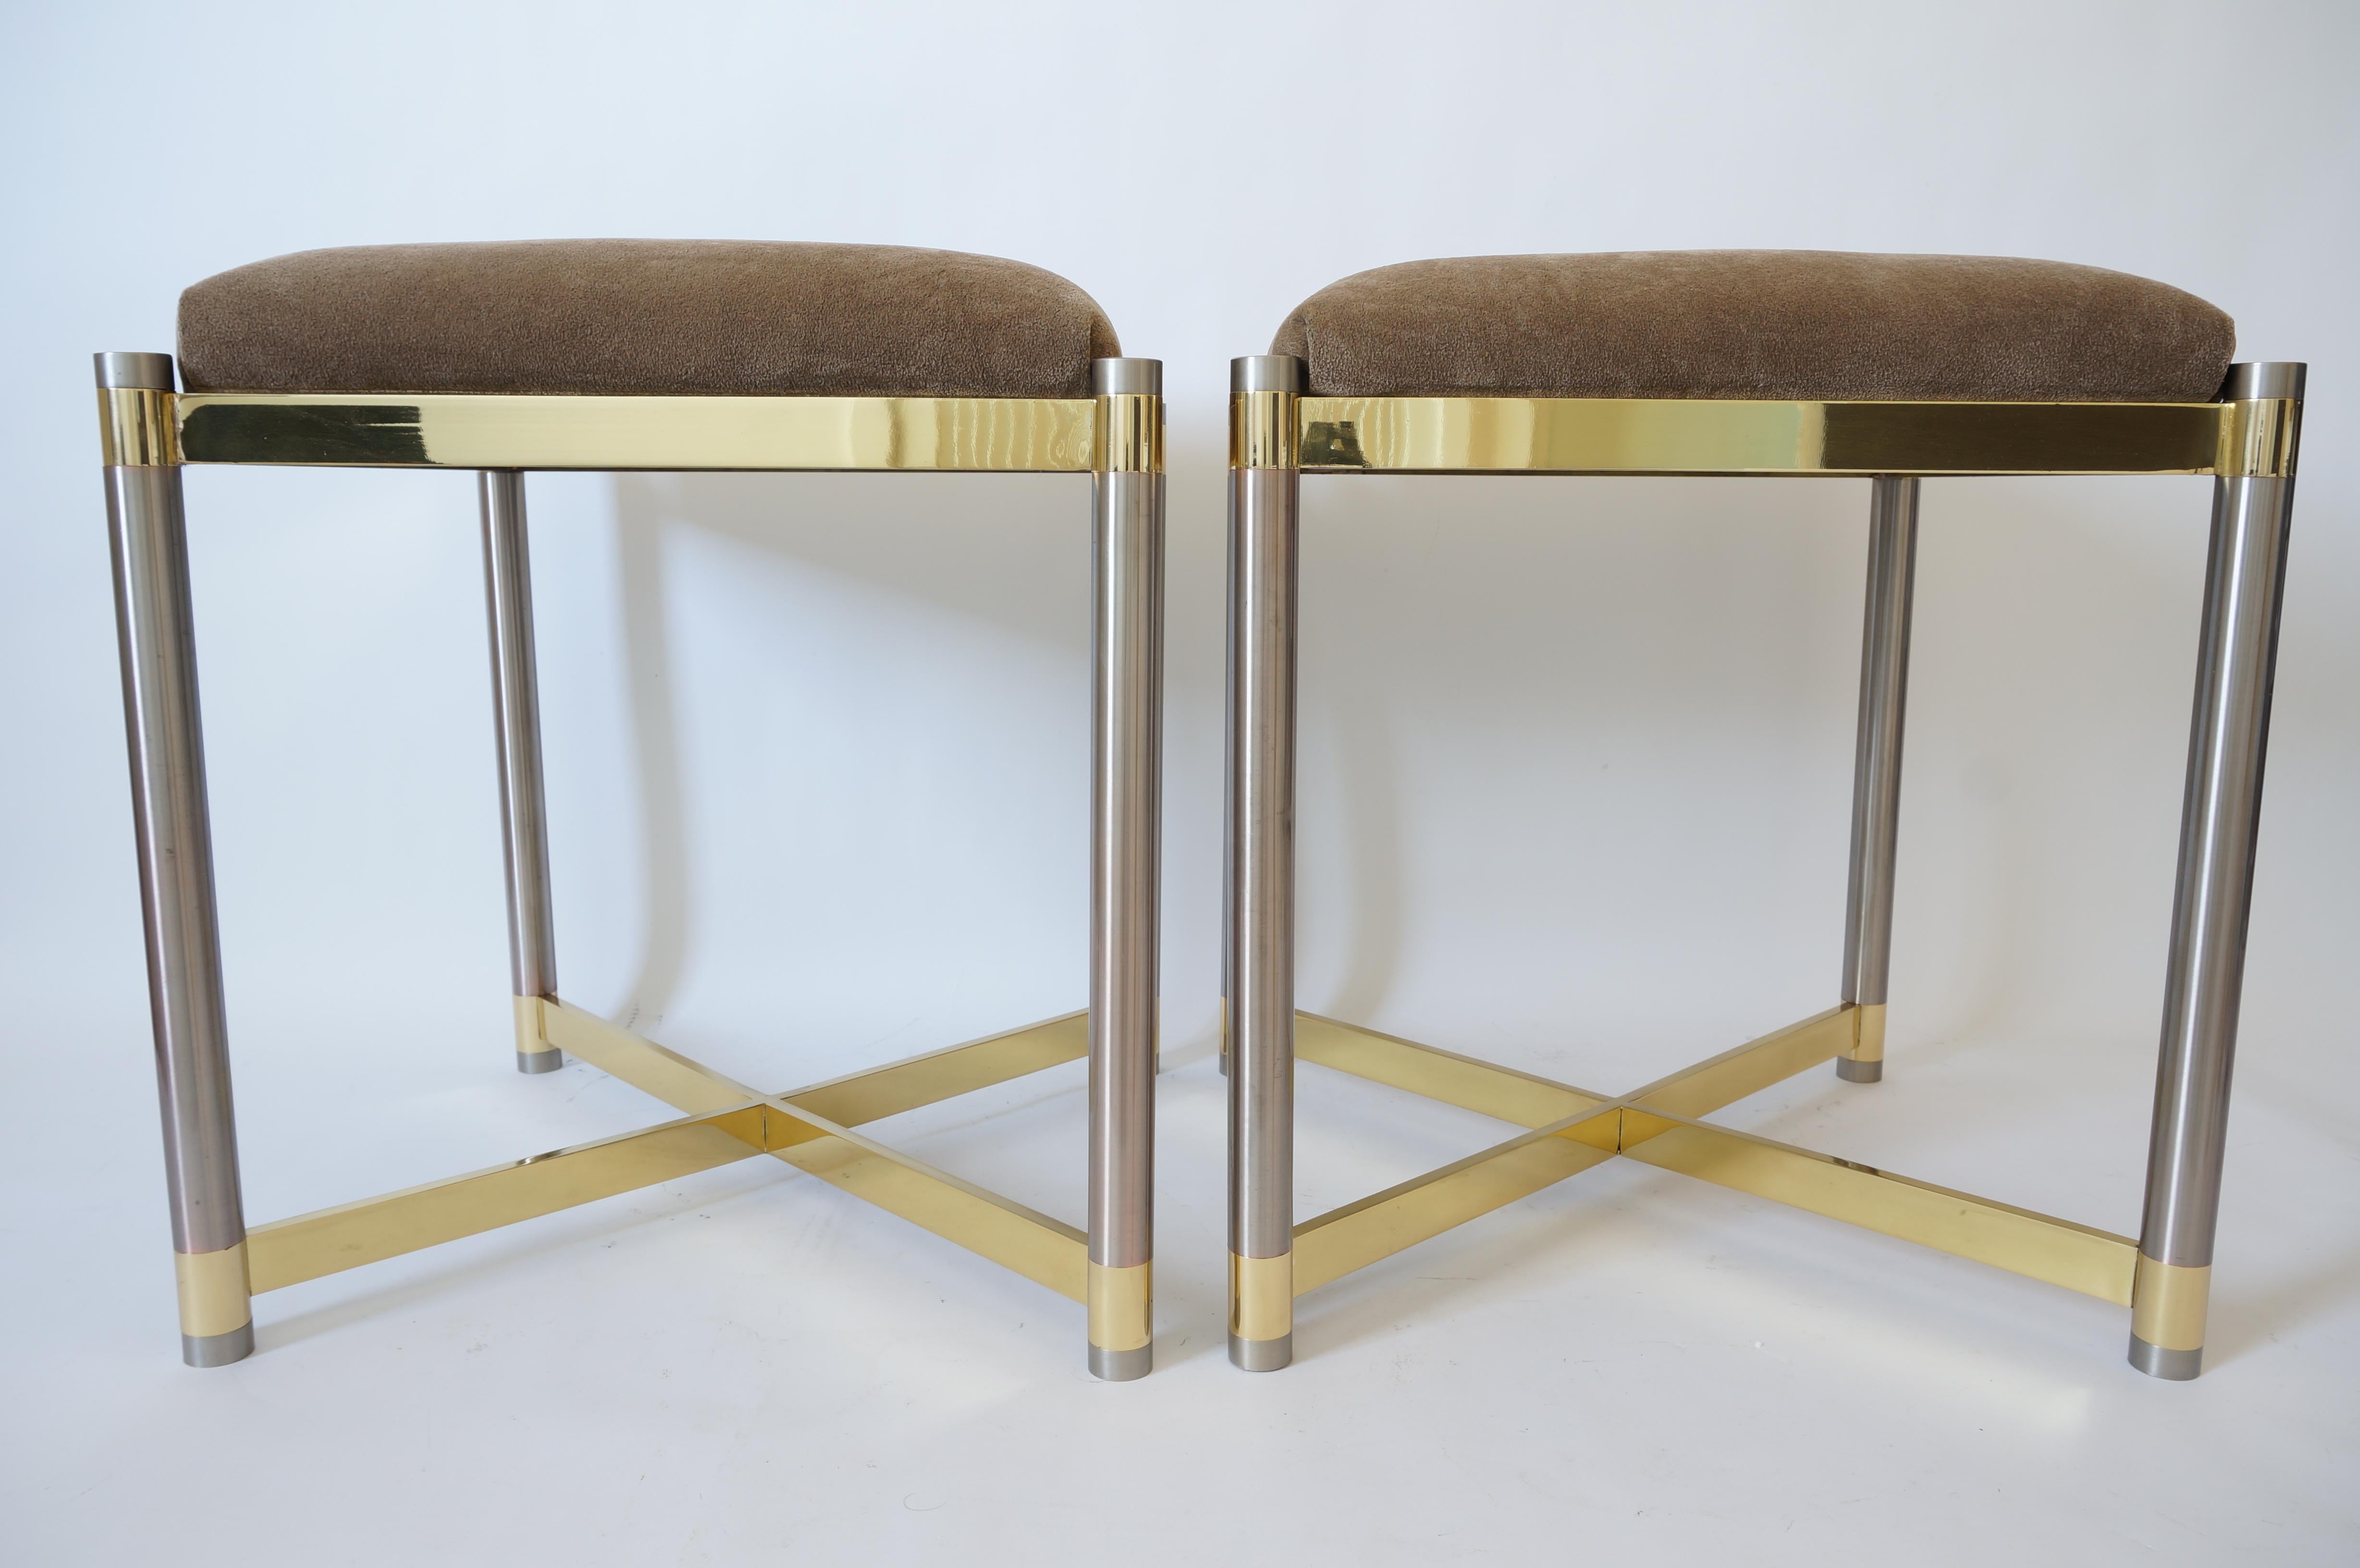 Polished Pair of Benches in Stainless Steel and Brass Attributed to Maison Jansen